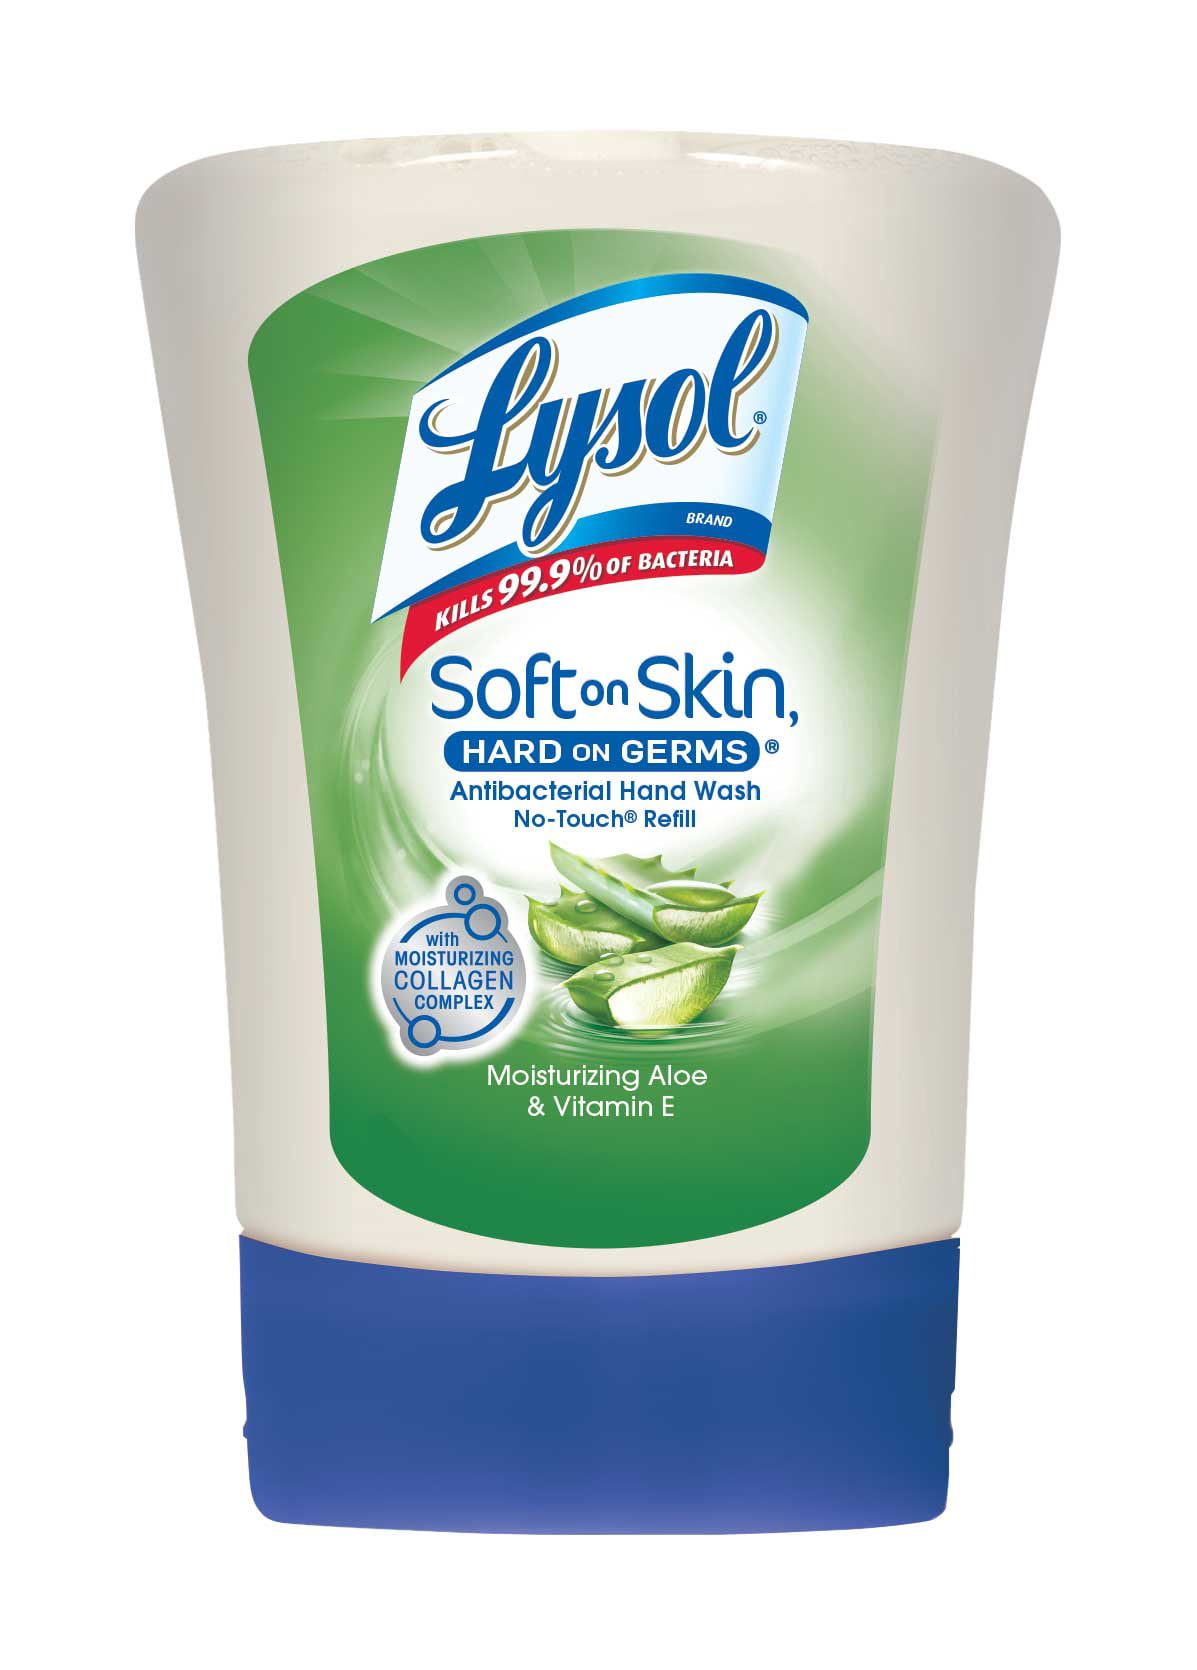 x3 Reusable Lysol No Touch Refill Transfer Cap Kits Dish Hand Soap Save $$ x3 